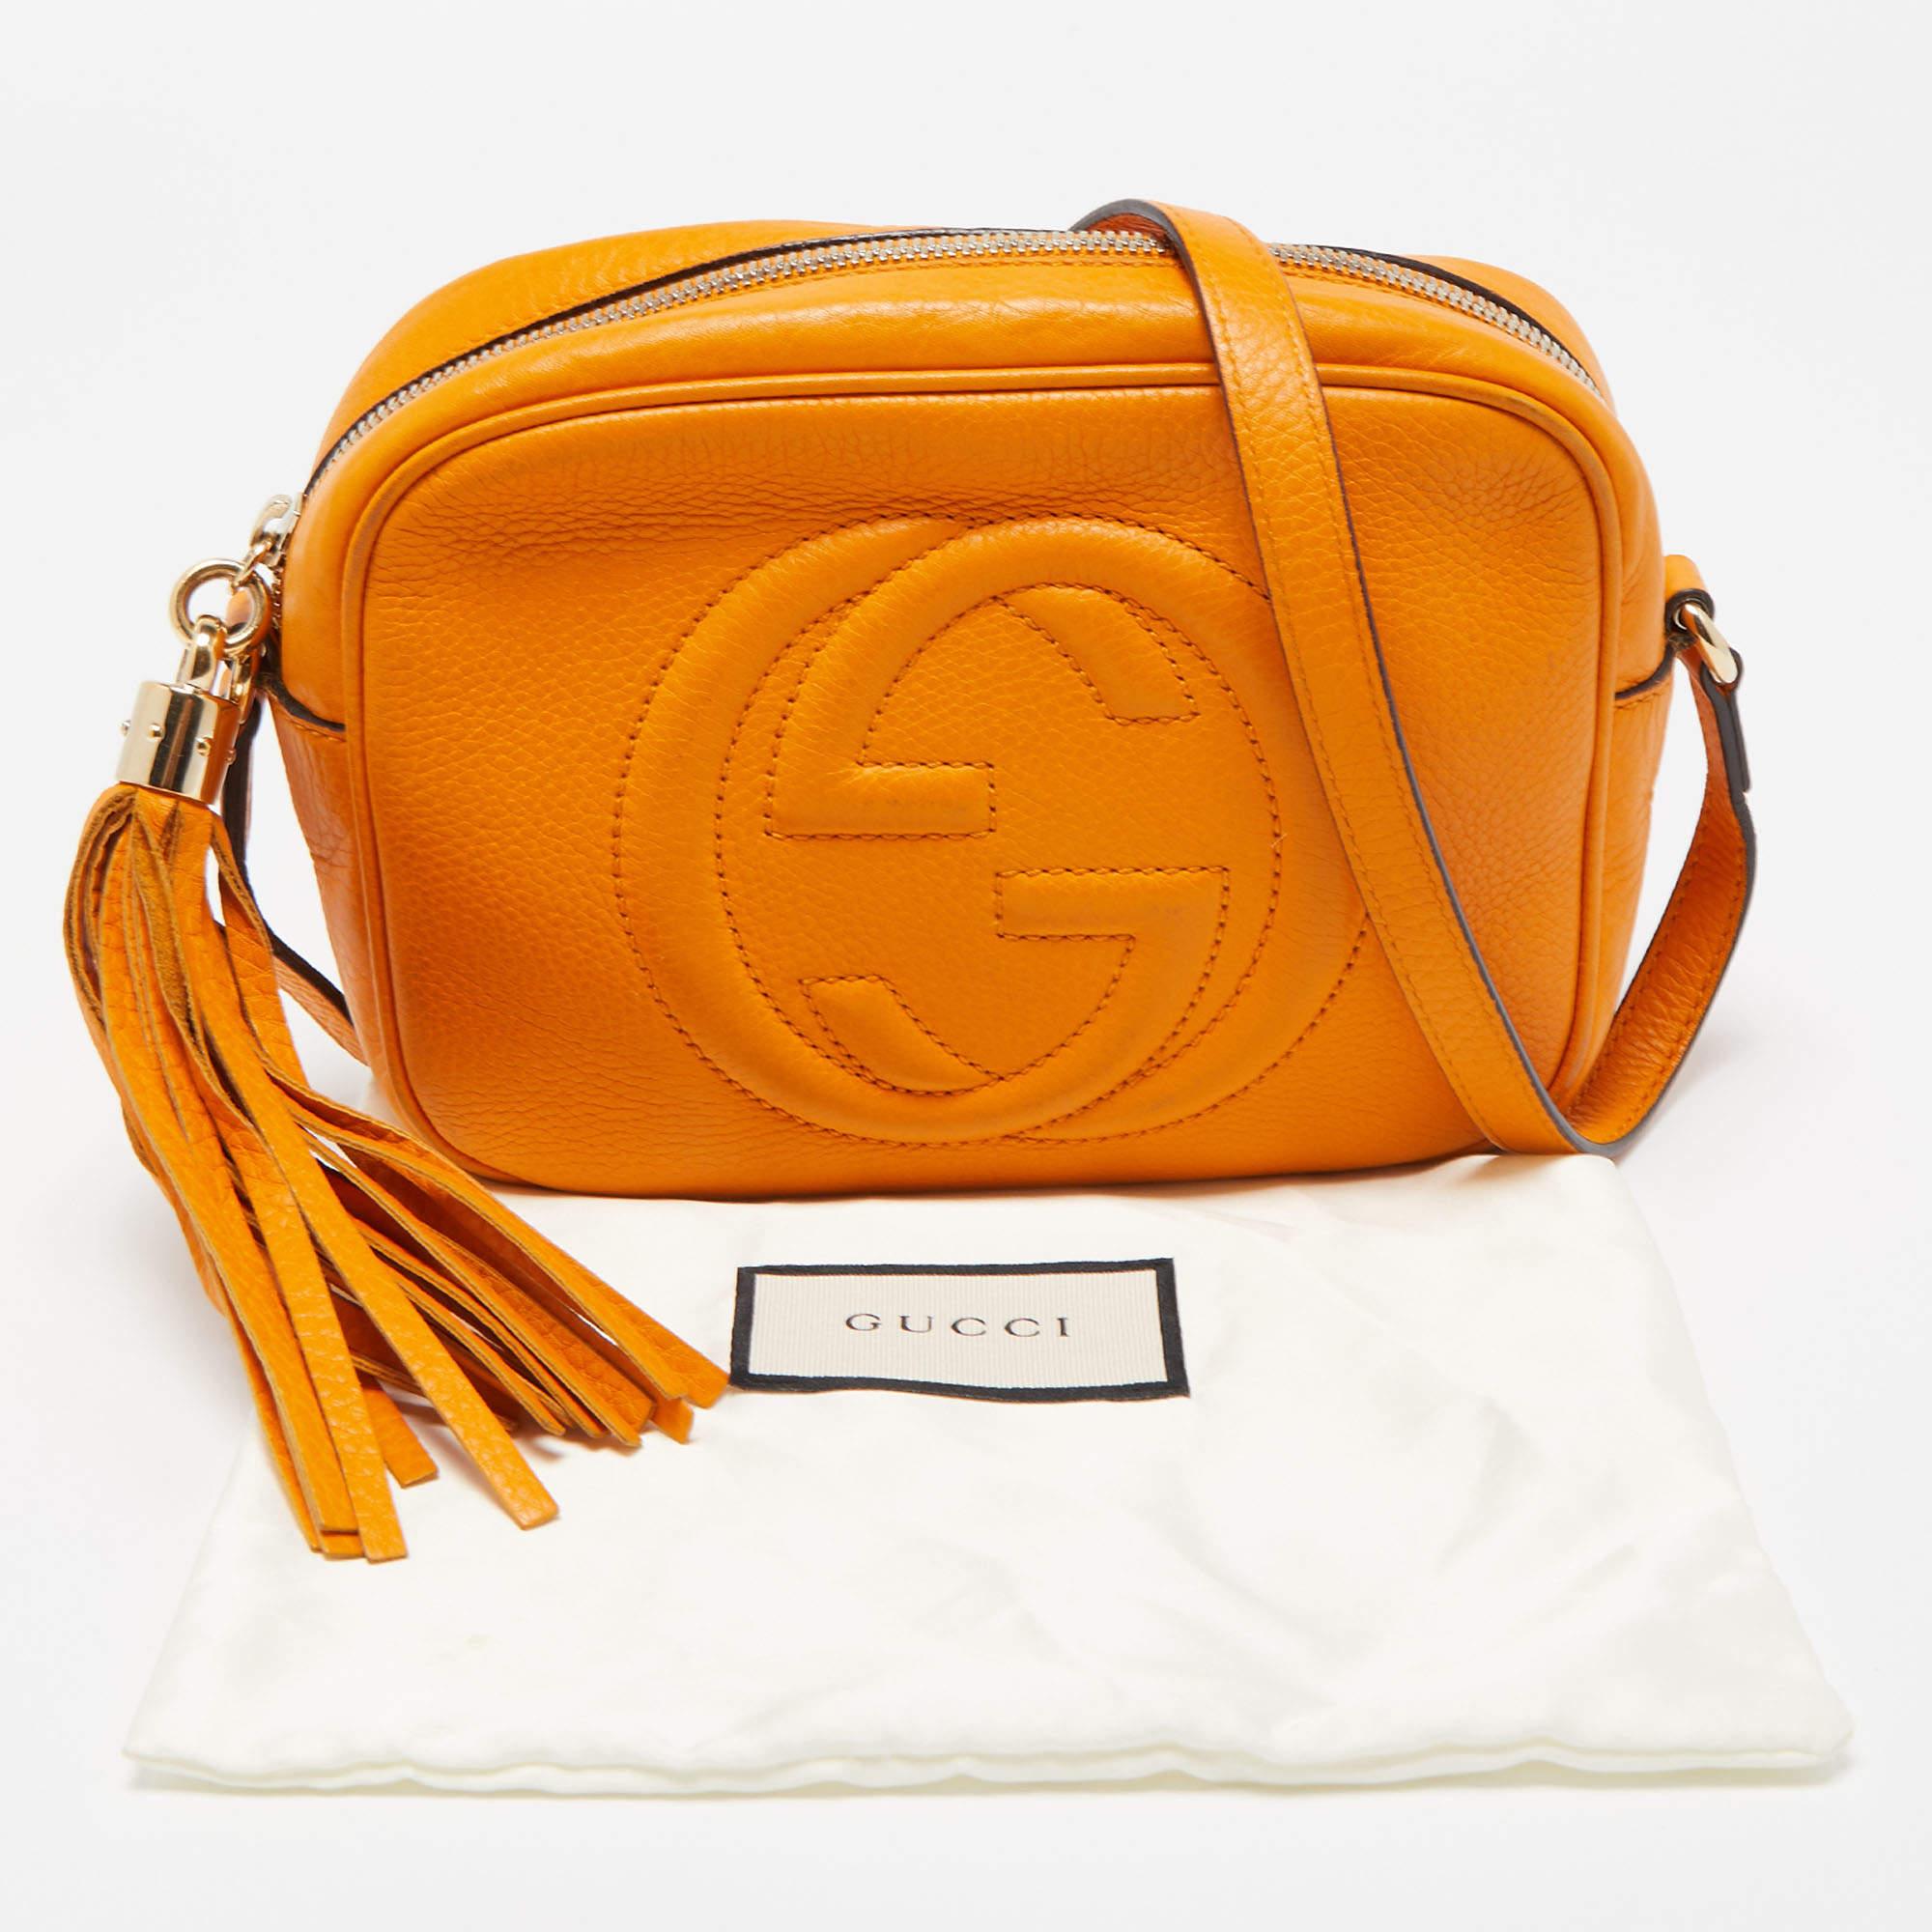 Gucci Mustard Yellow Leather Small Soho Disco Shoulder Bag 8